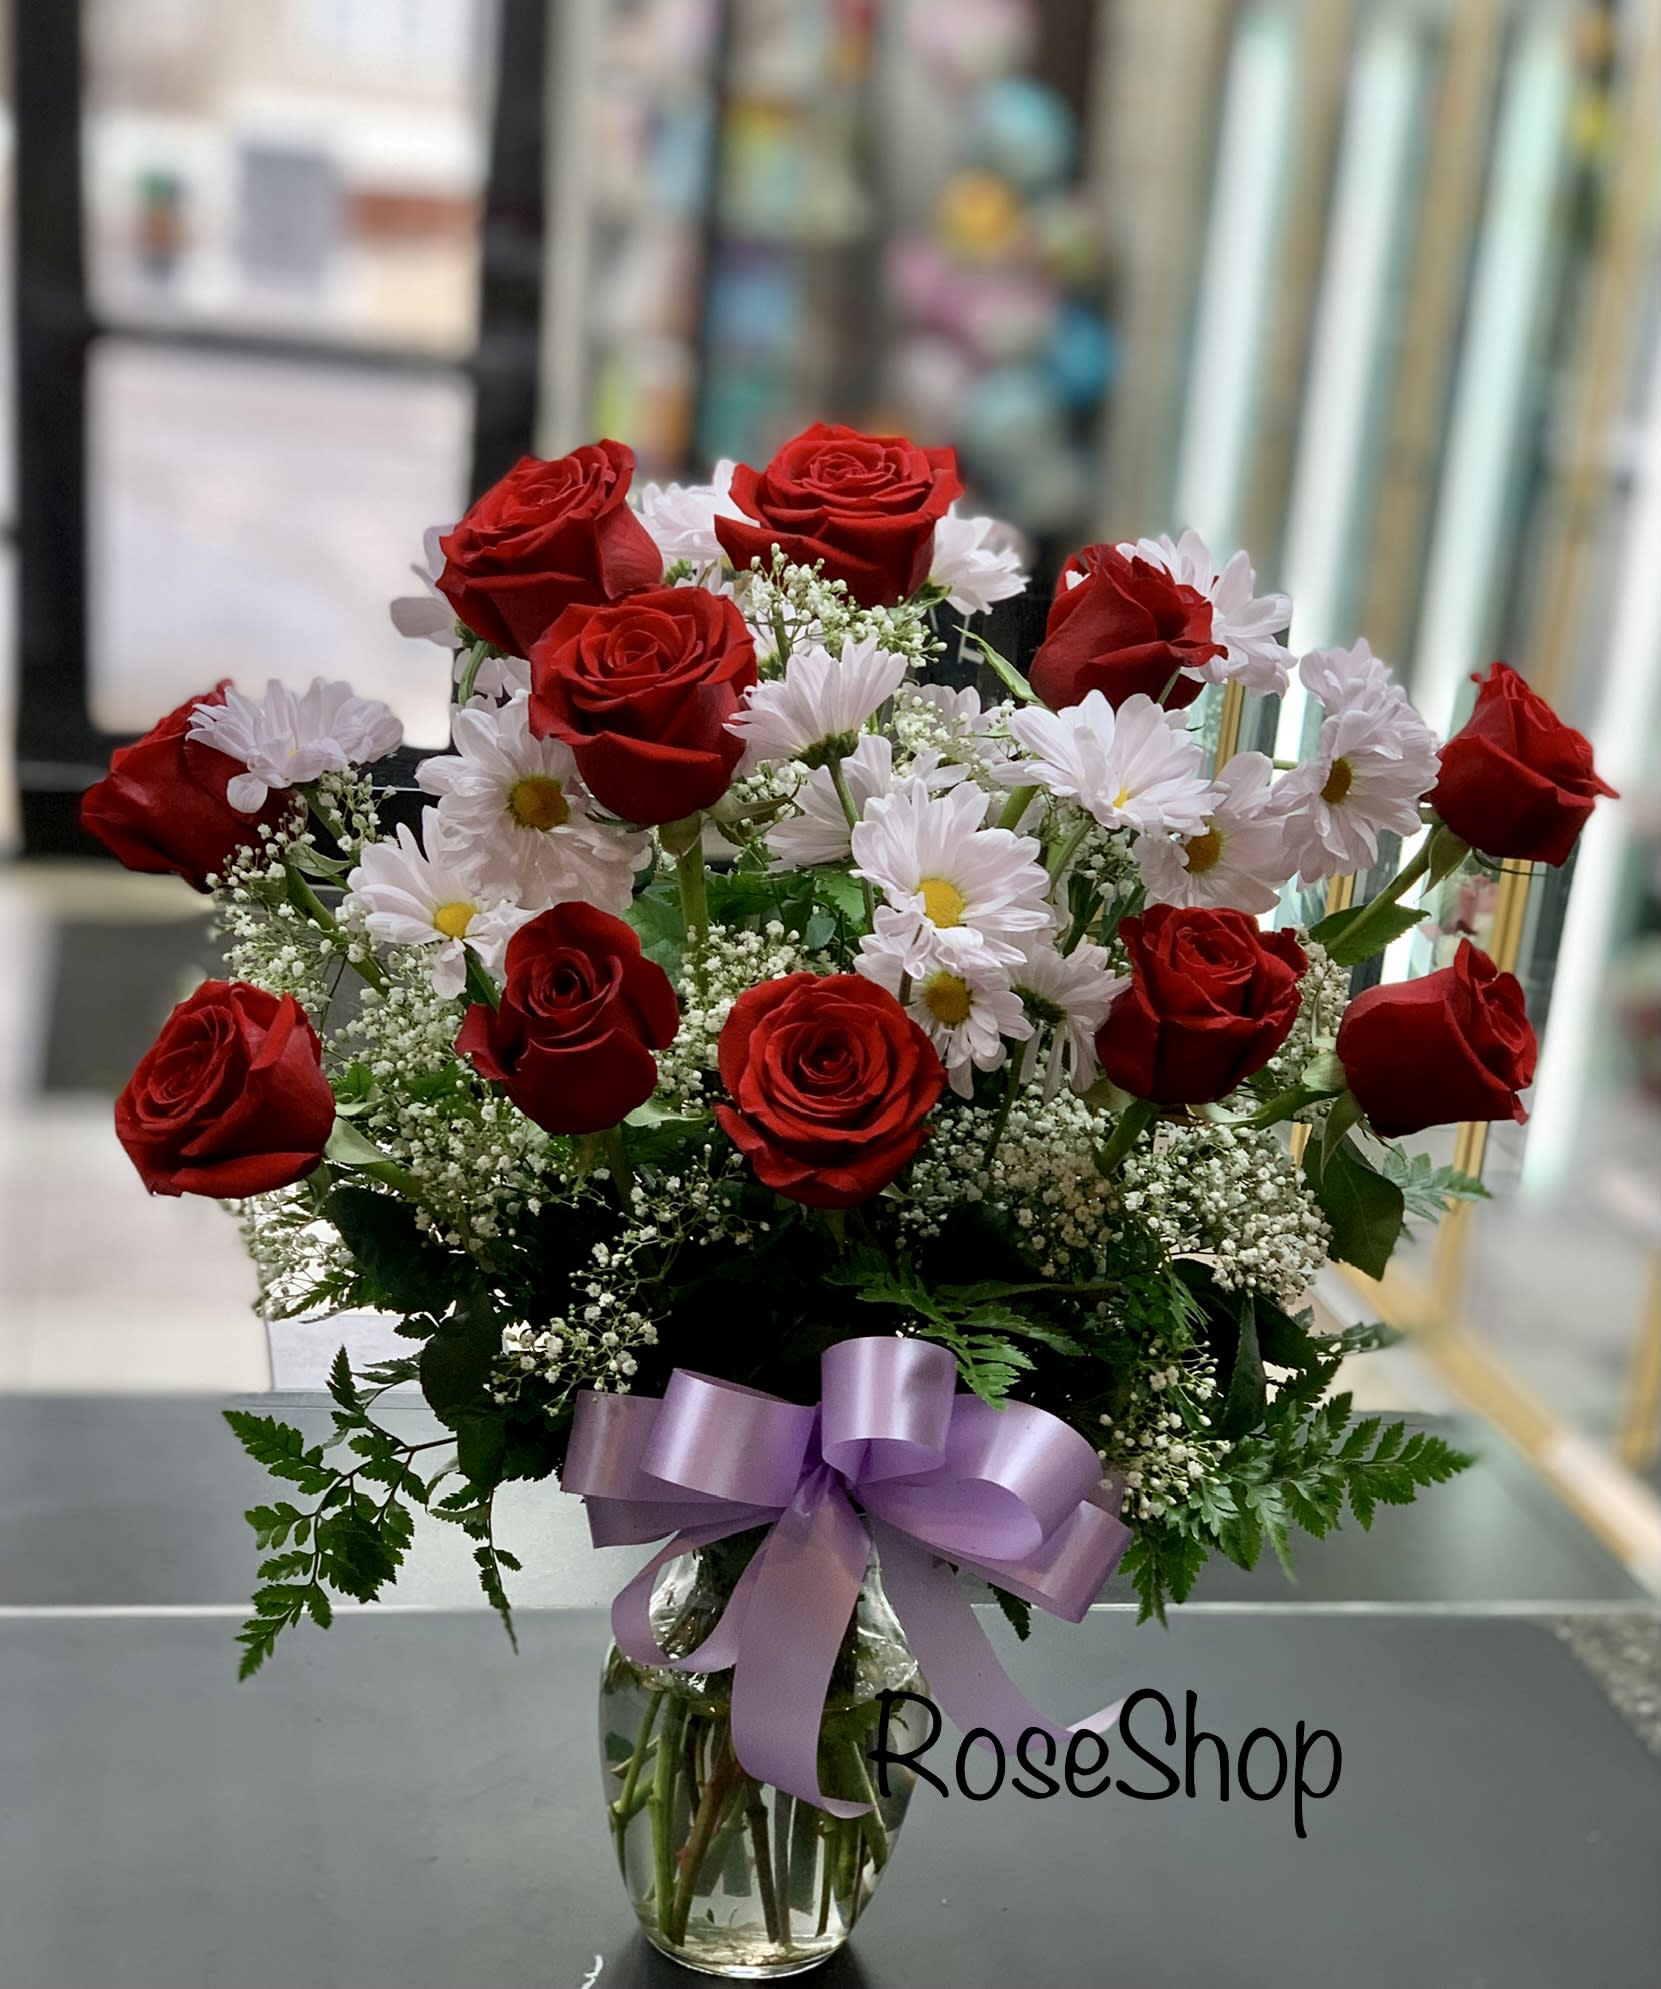 Roses and purple daisies - One dozen long stem red roses surrounded by lavender daisies accented with ribbon in a clear vase.  Approx. 17”H x 15”W